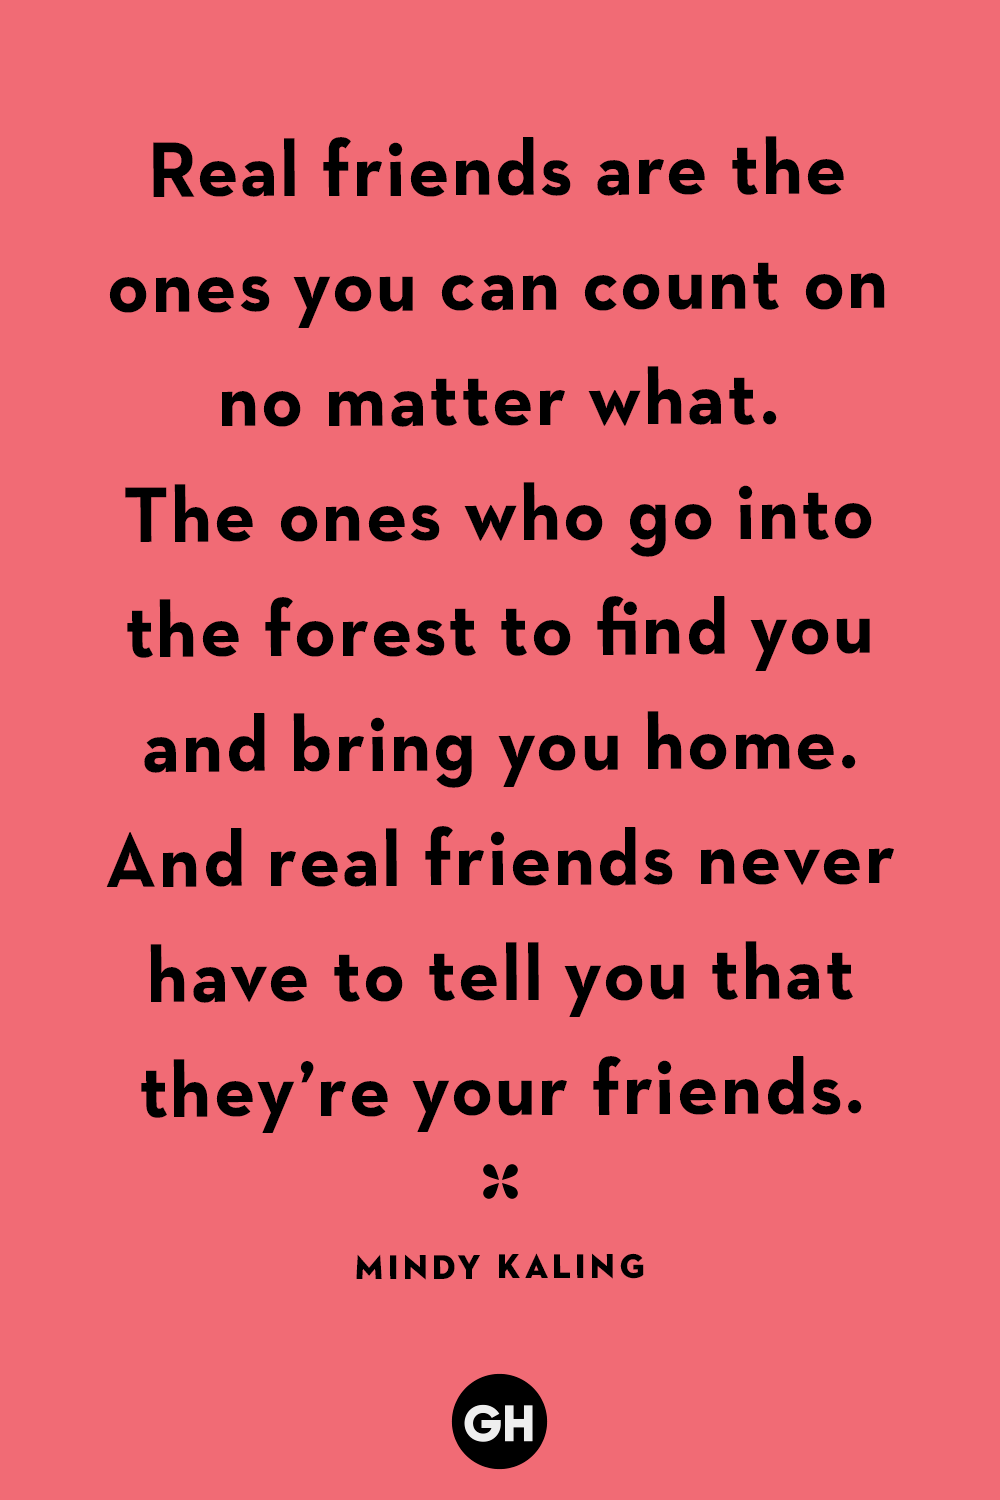 together forever friendship quotes